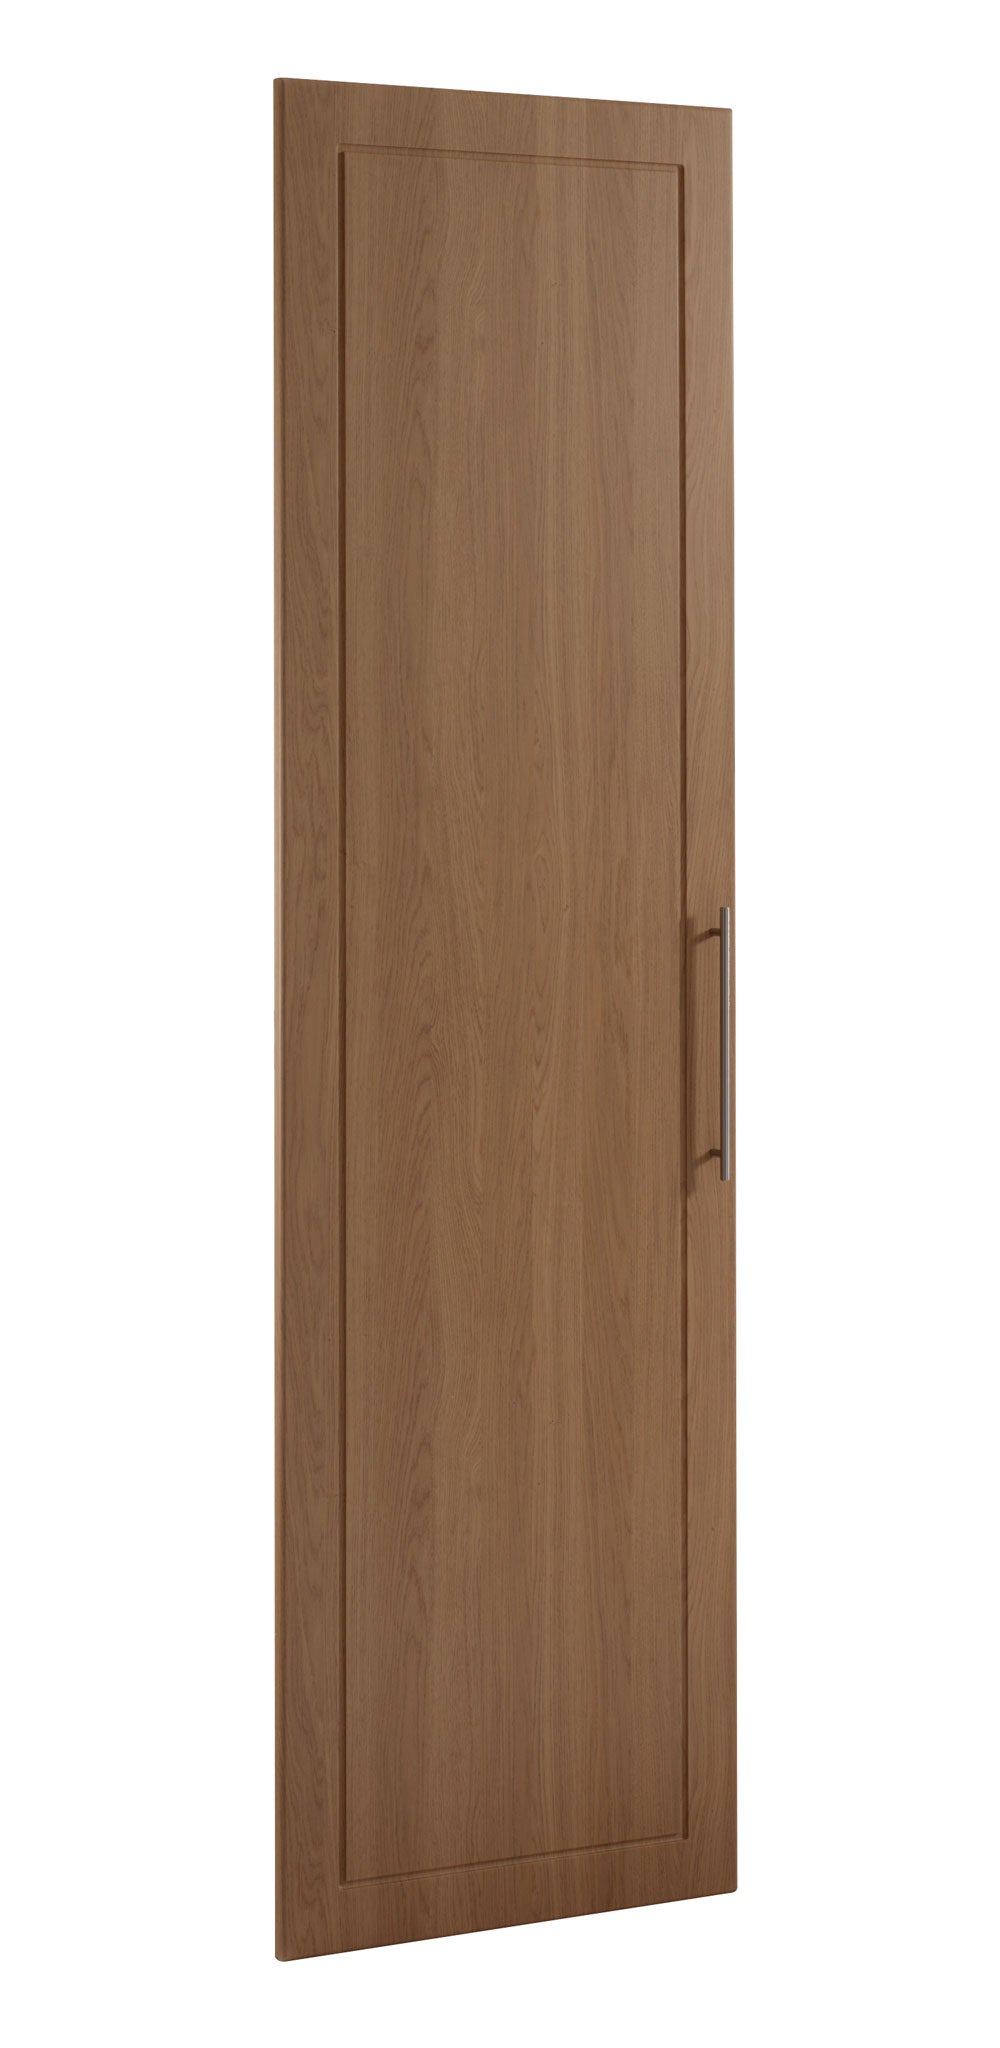  Esquire style cupboard door in any colour